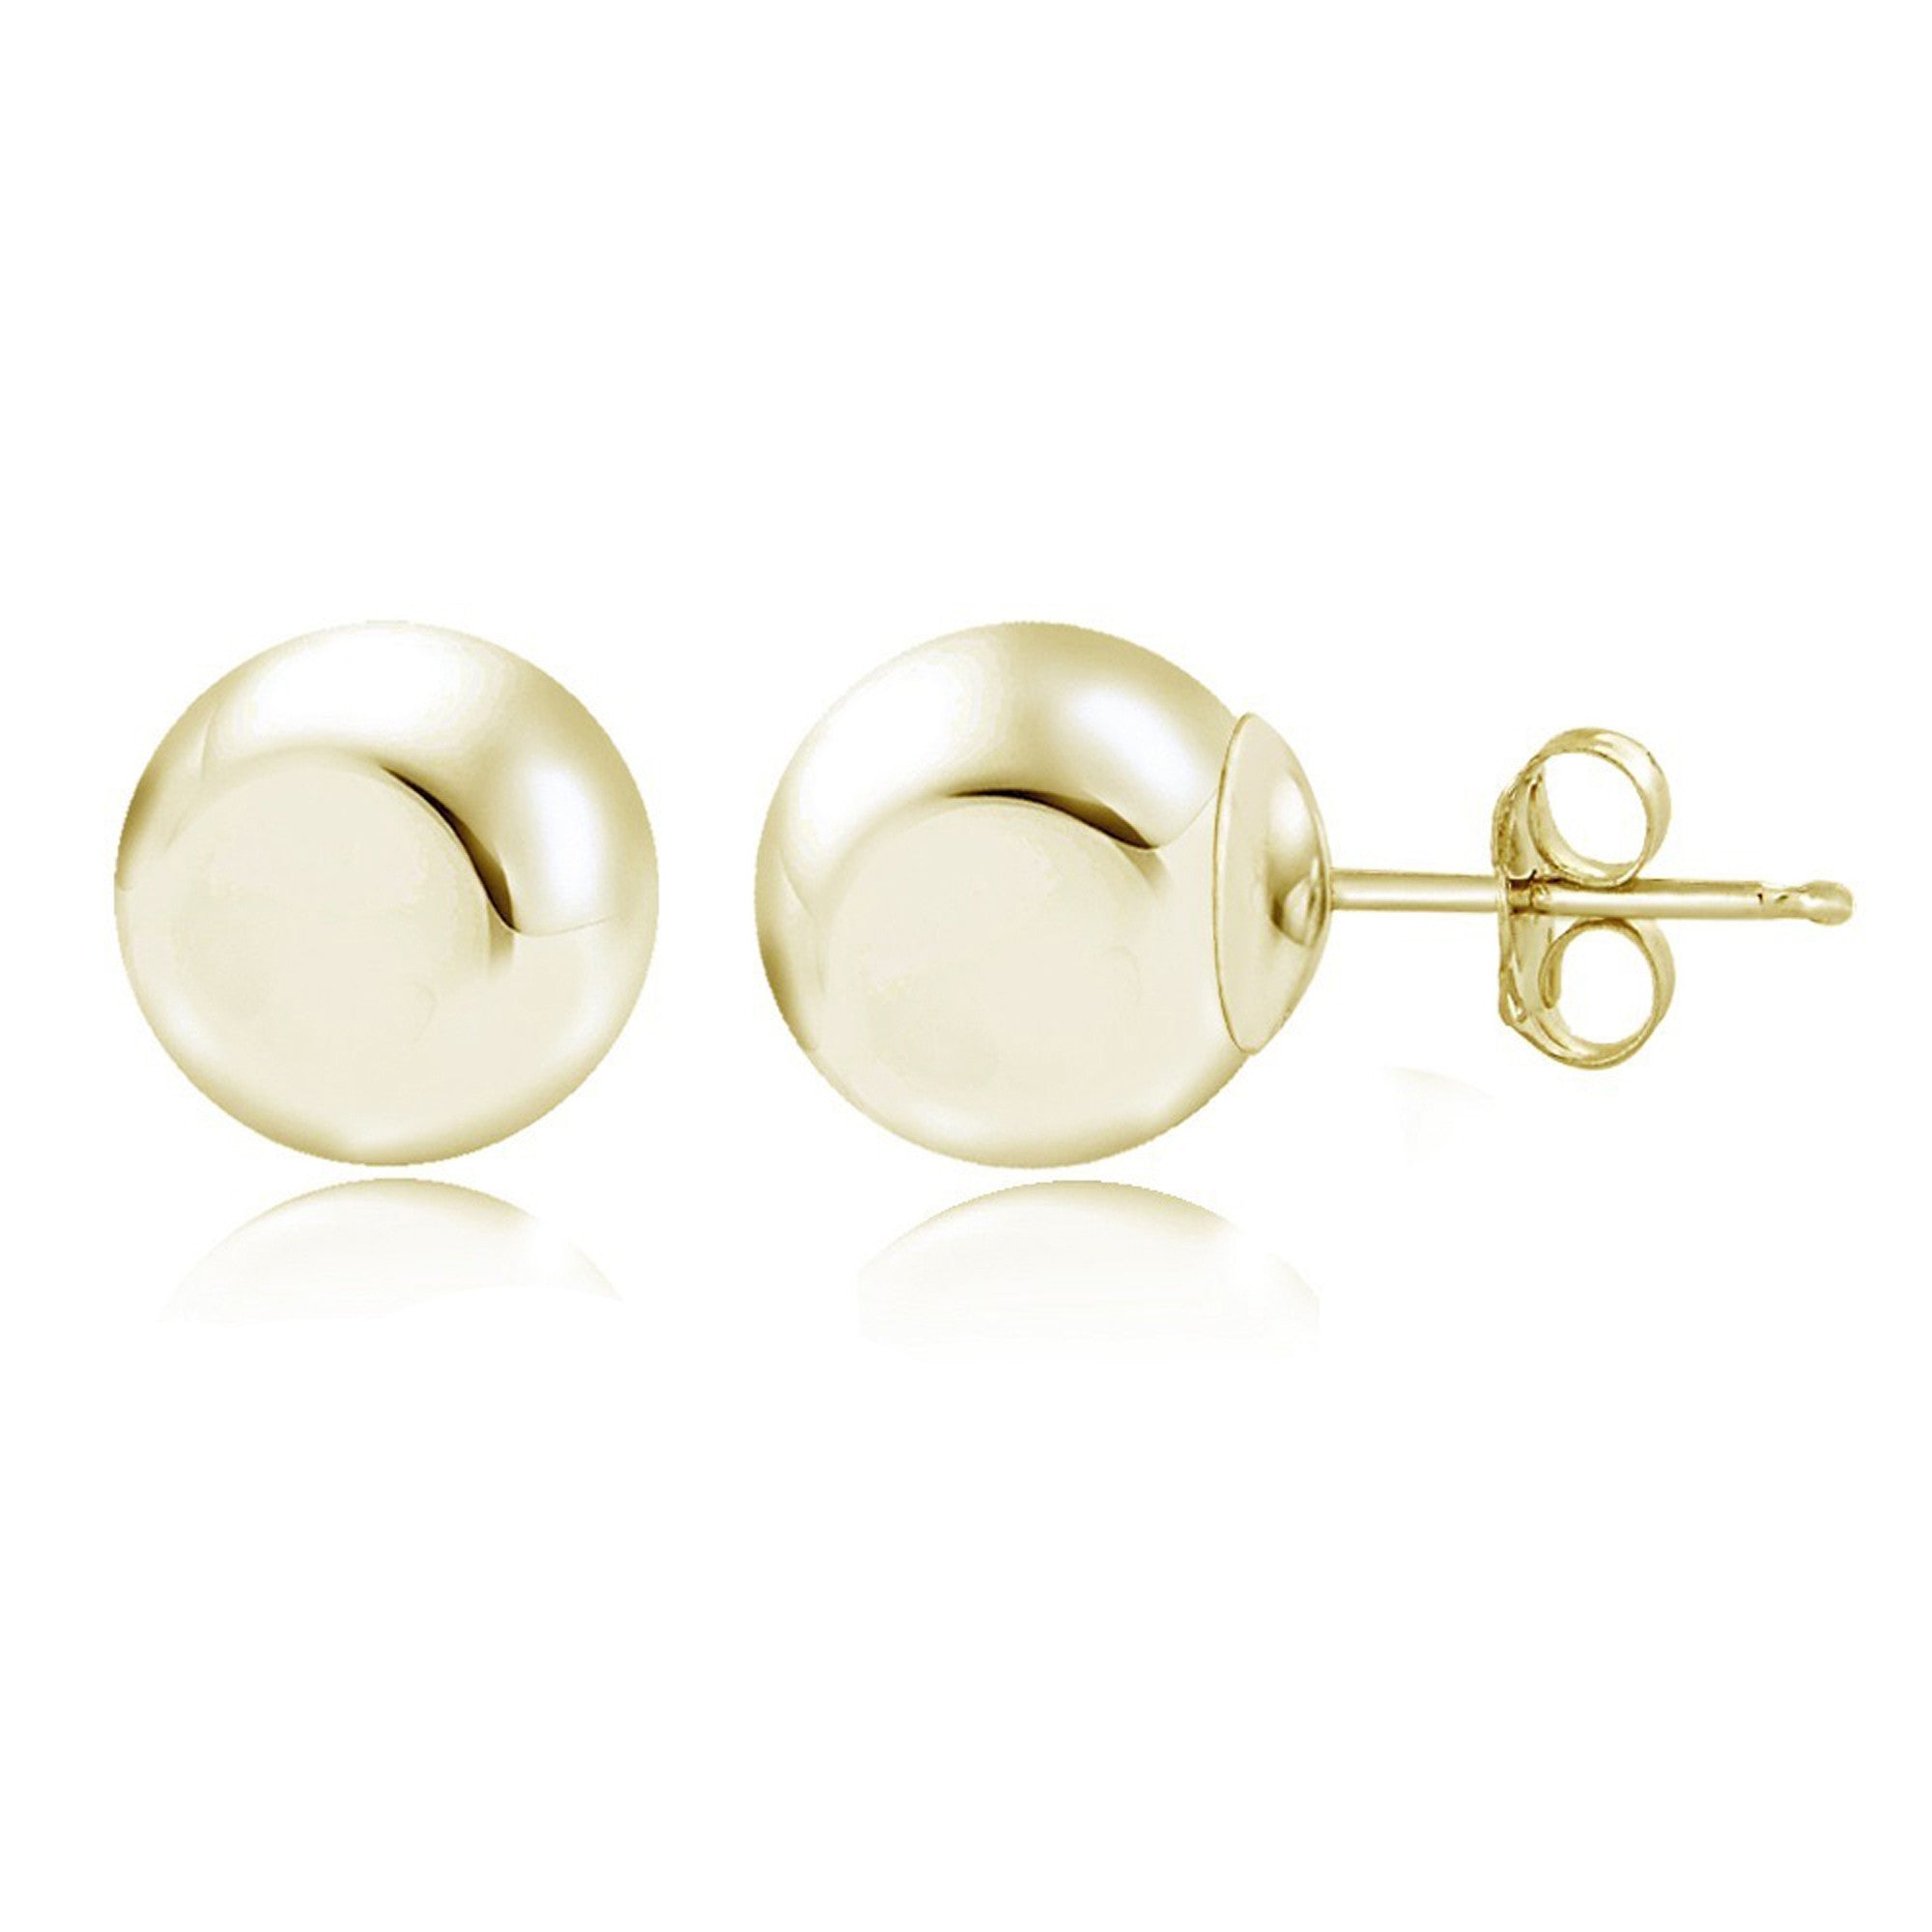 Round Ball Butterfly Clasp Stud Earrings - 8mm Yellow Gold